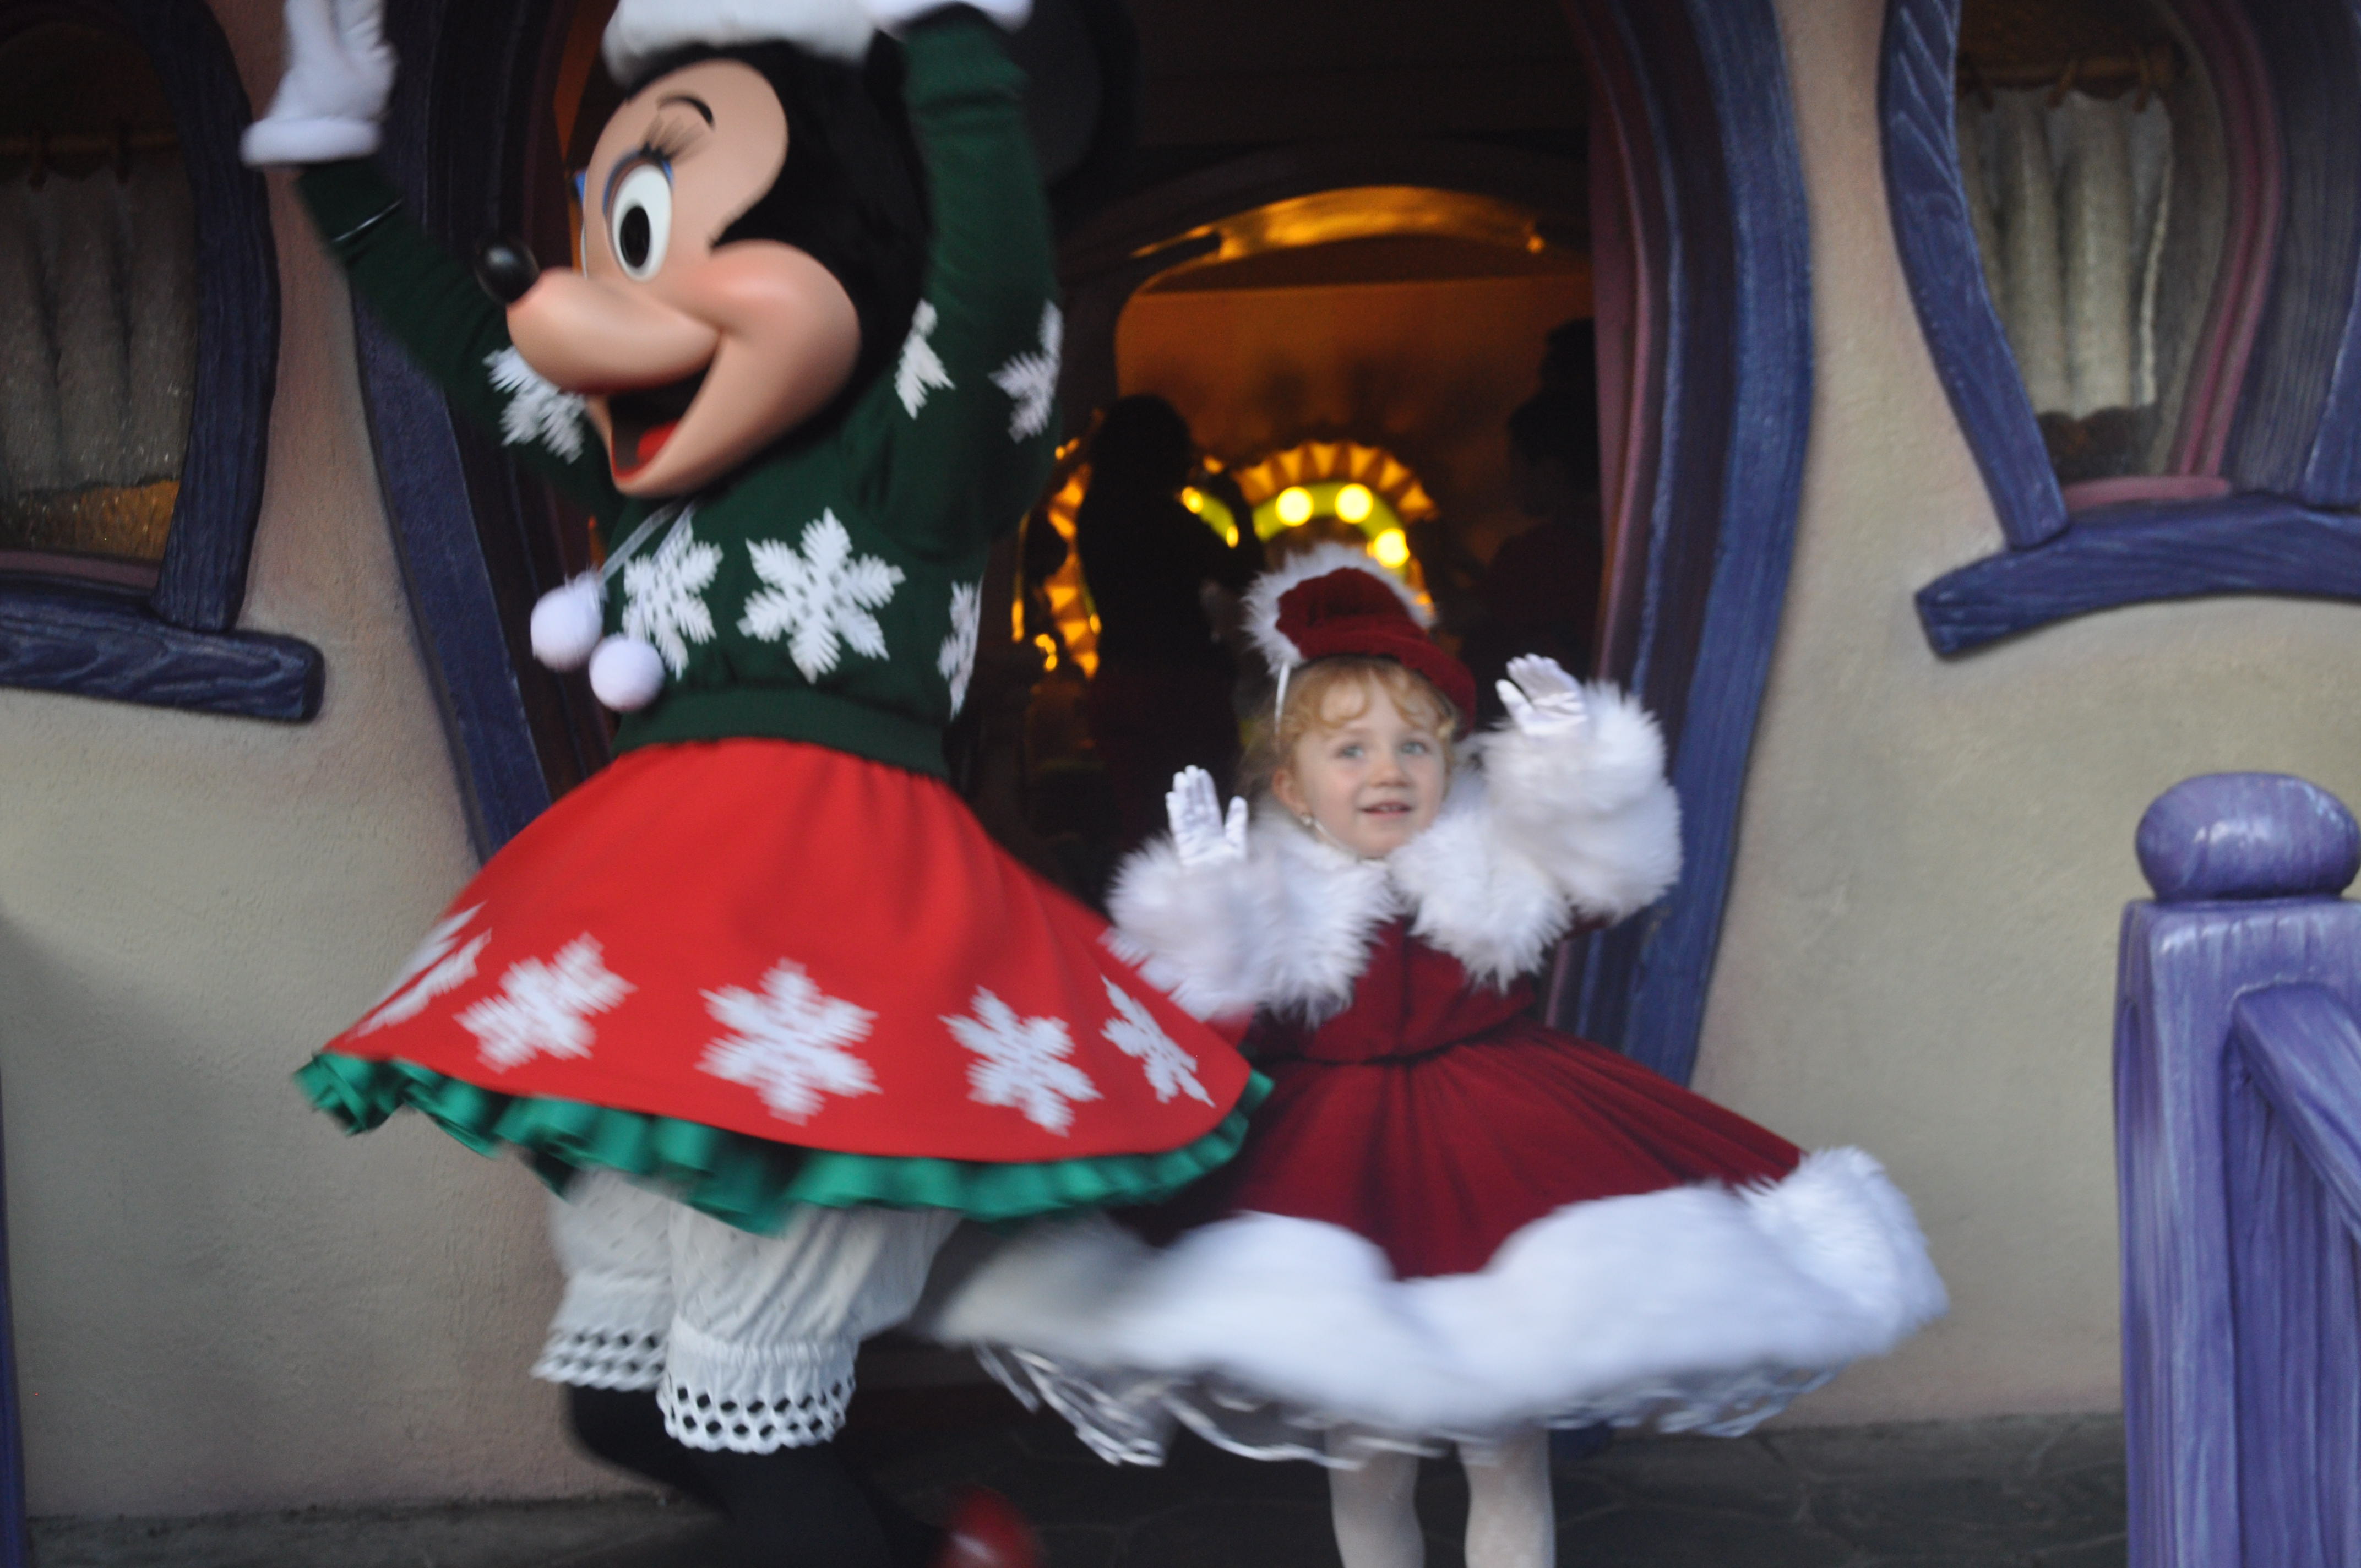 Christmas Dance with Minnie Mouse at Disney Land. Costume custom-designed and custom-made by Oxana Foss